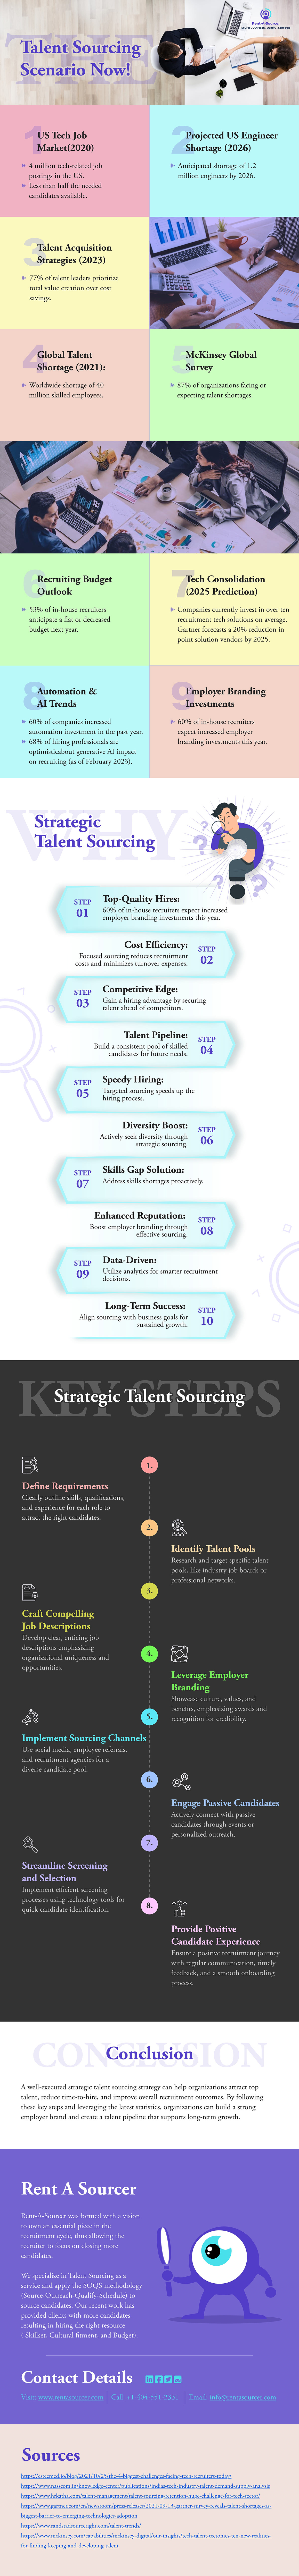 recruitment Candidate Sourcing talent sourcing